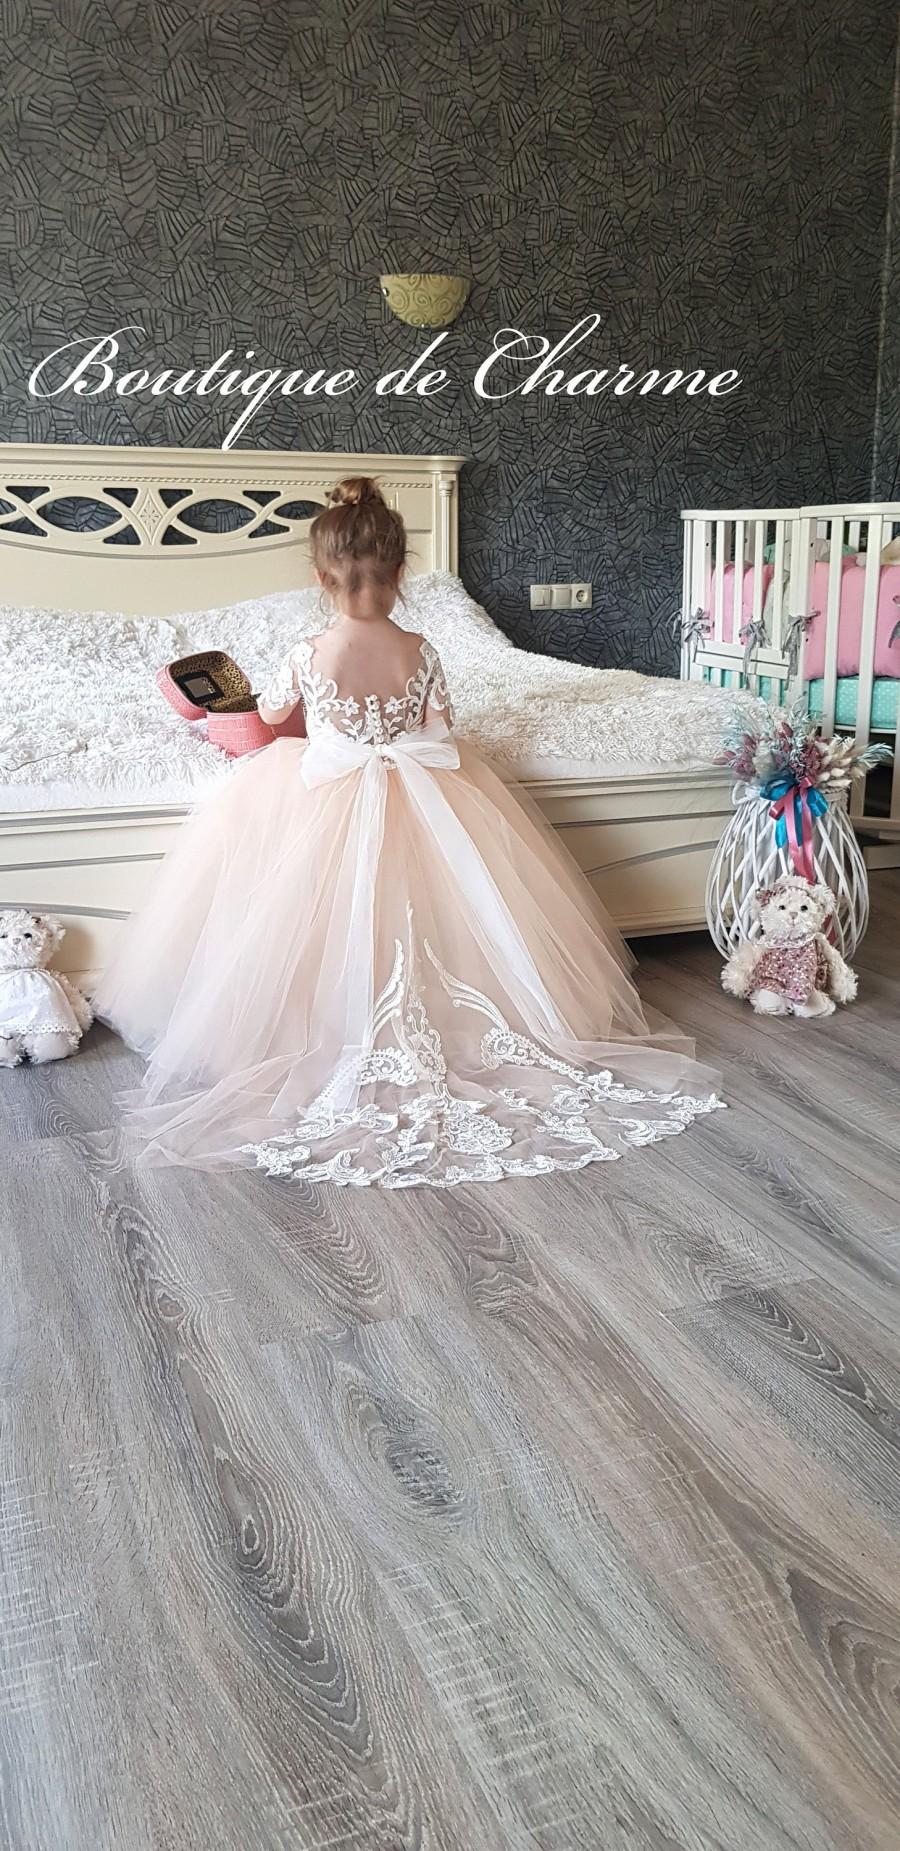 Wedding - Tutu girl dress,Tulle and lace flower girl dress,Elegant toddler dress,Princess flower girl dress,Lace dress,Formal girl dresses,Ivory dress